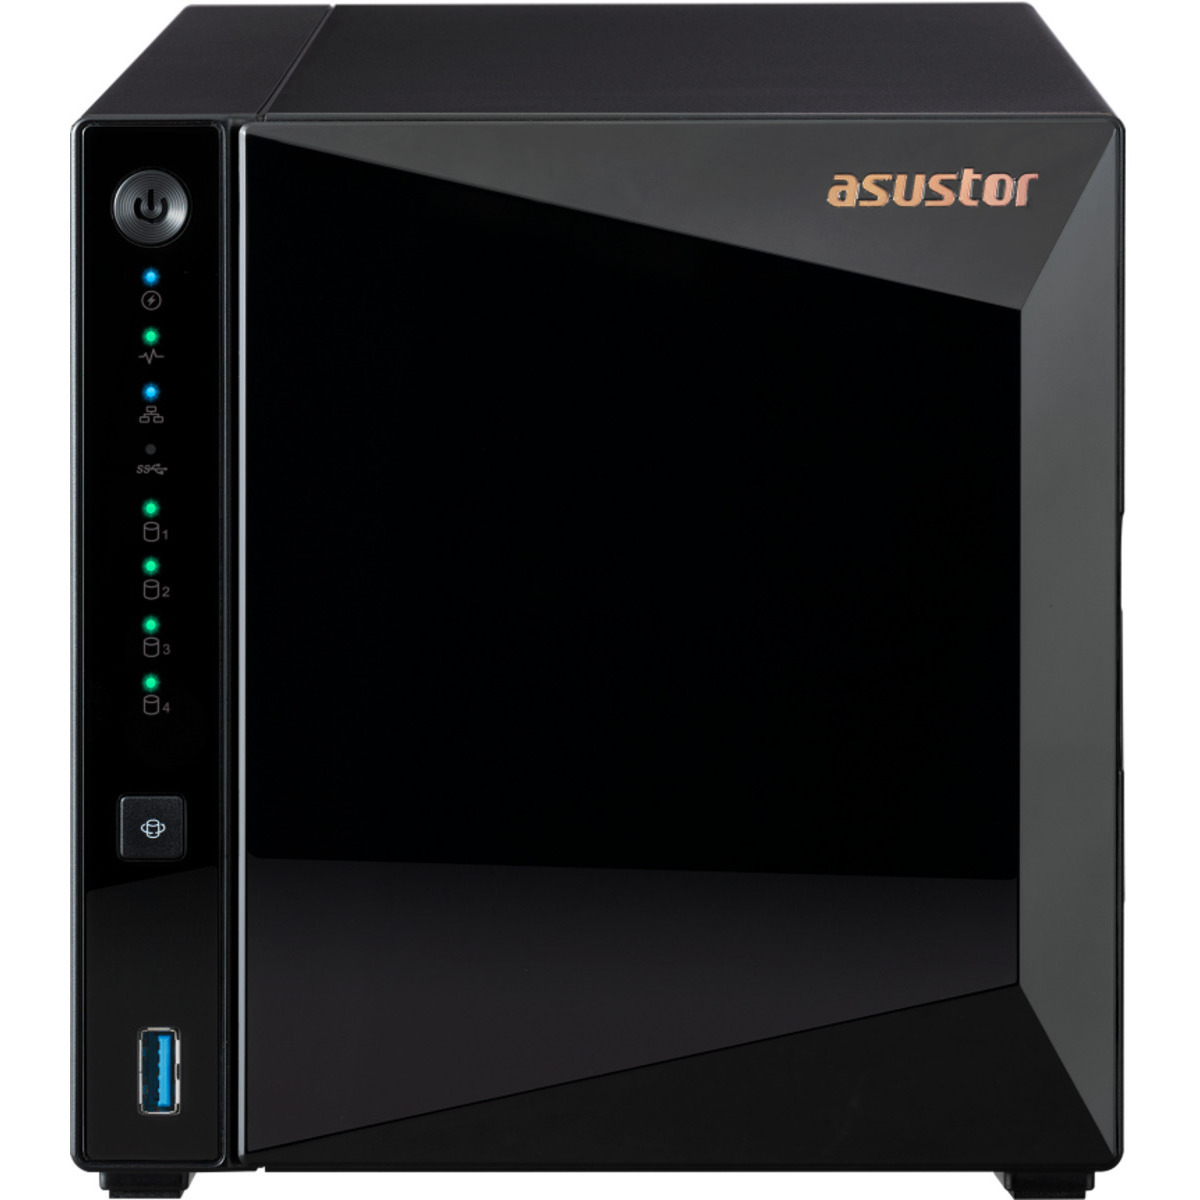 ASUSTOR DRIVESTOR 4 Pro Gen2 AS3304T v2 40tb 4-Bay Desktop Personal / Basic Home / Small Office NAS - Network Attached Storage Device 4x10tb Seagate IronWolf Pro ST10000NT001 3.5 7200rpm SATA 6Gb/s HDD NAS Class Drives Installed - Burn-In Tested - ON SALE DRIVESTOR 4 Pro Gen2 AS3304T v2